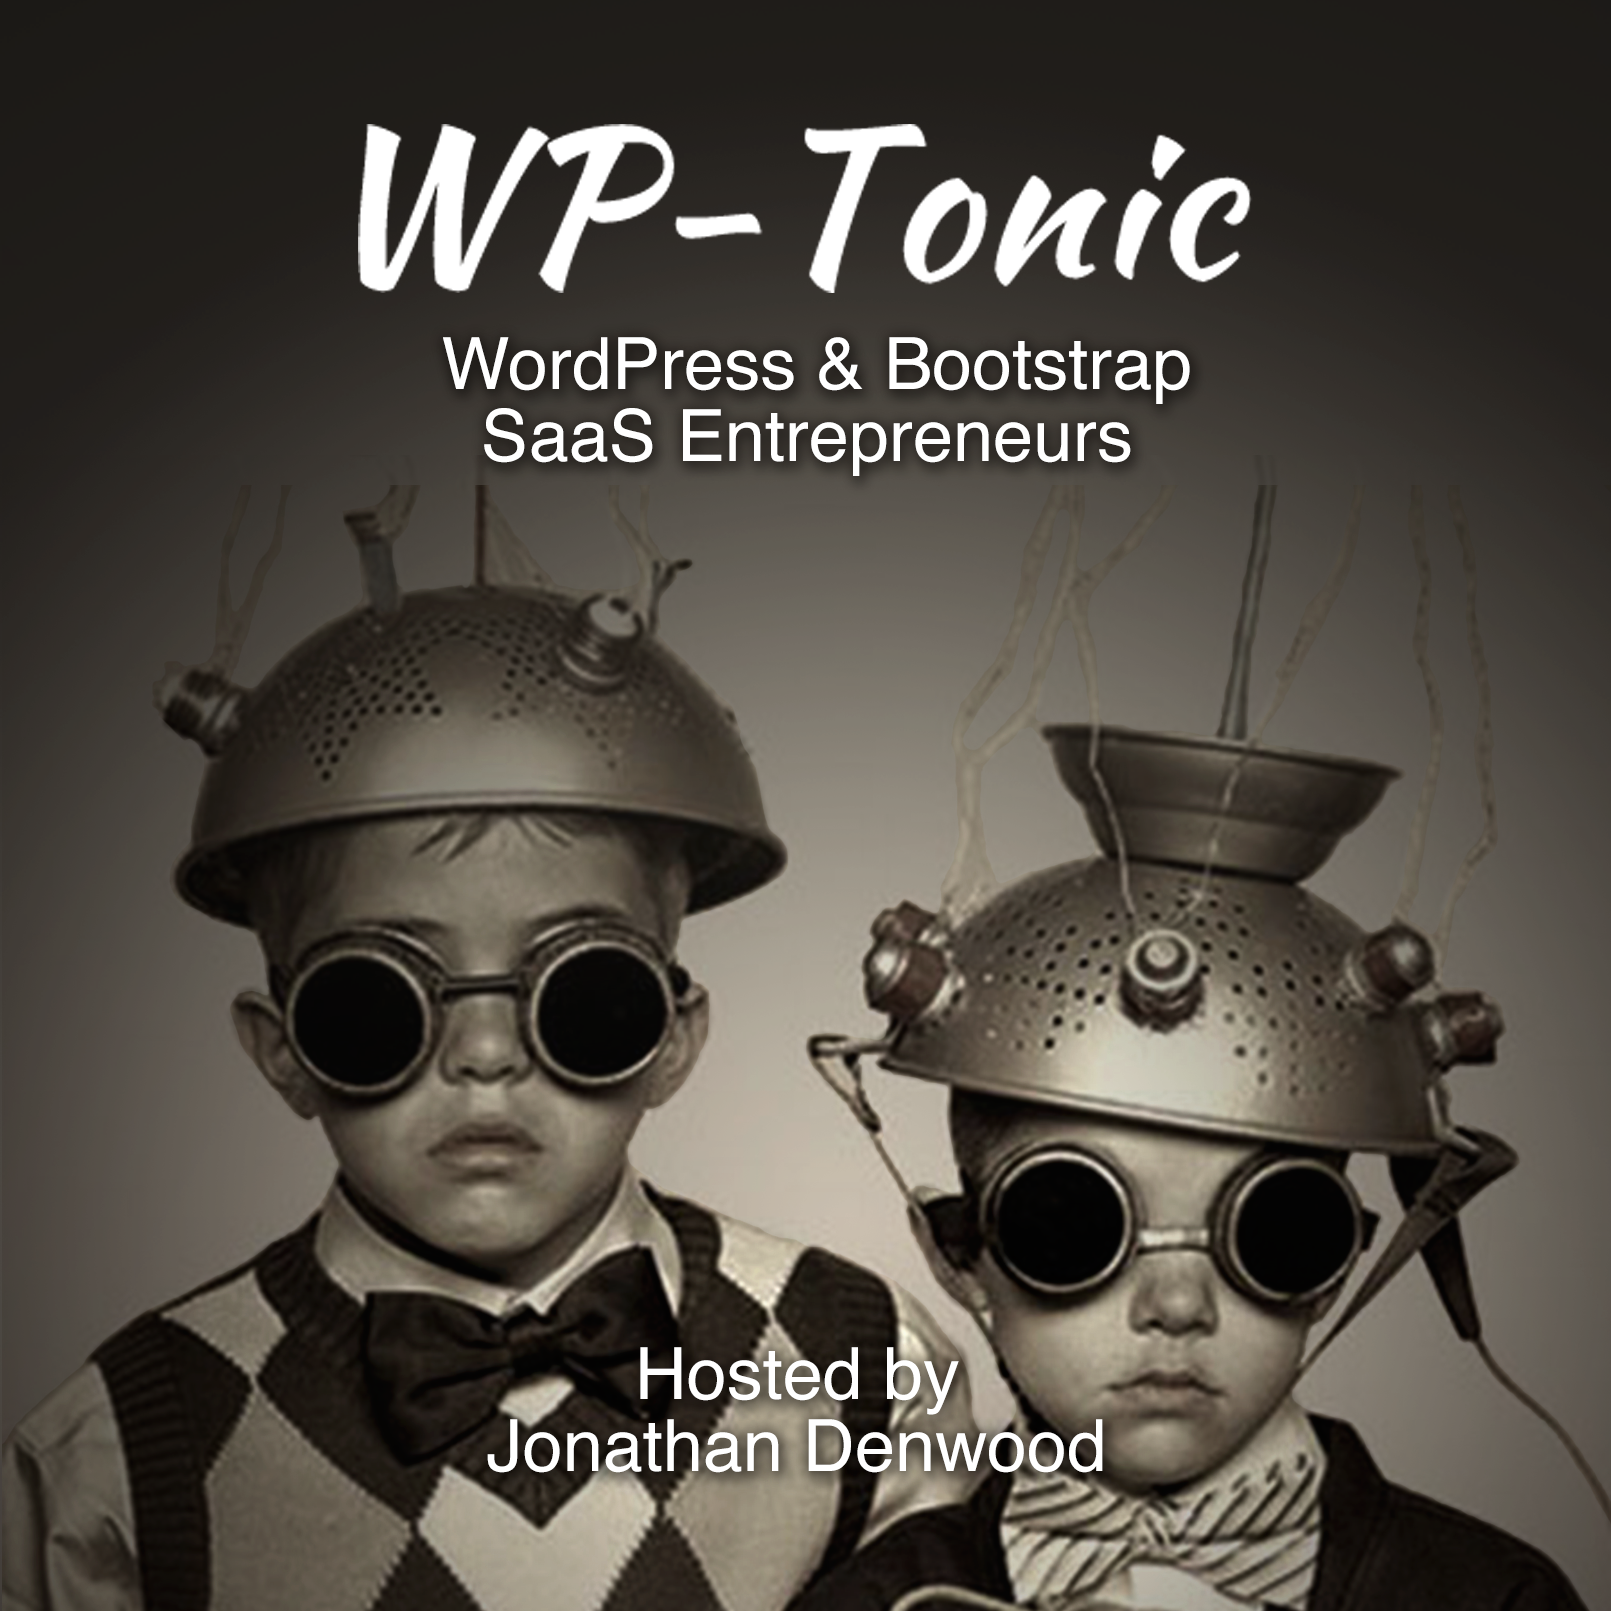 #421 WP-Tonic Round-Table Show On Friday August 16th  at 8:30am PST 